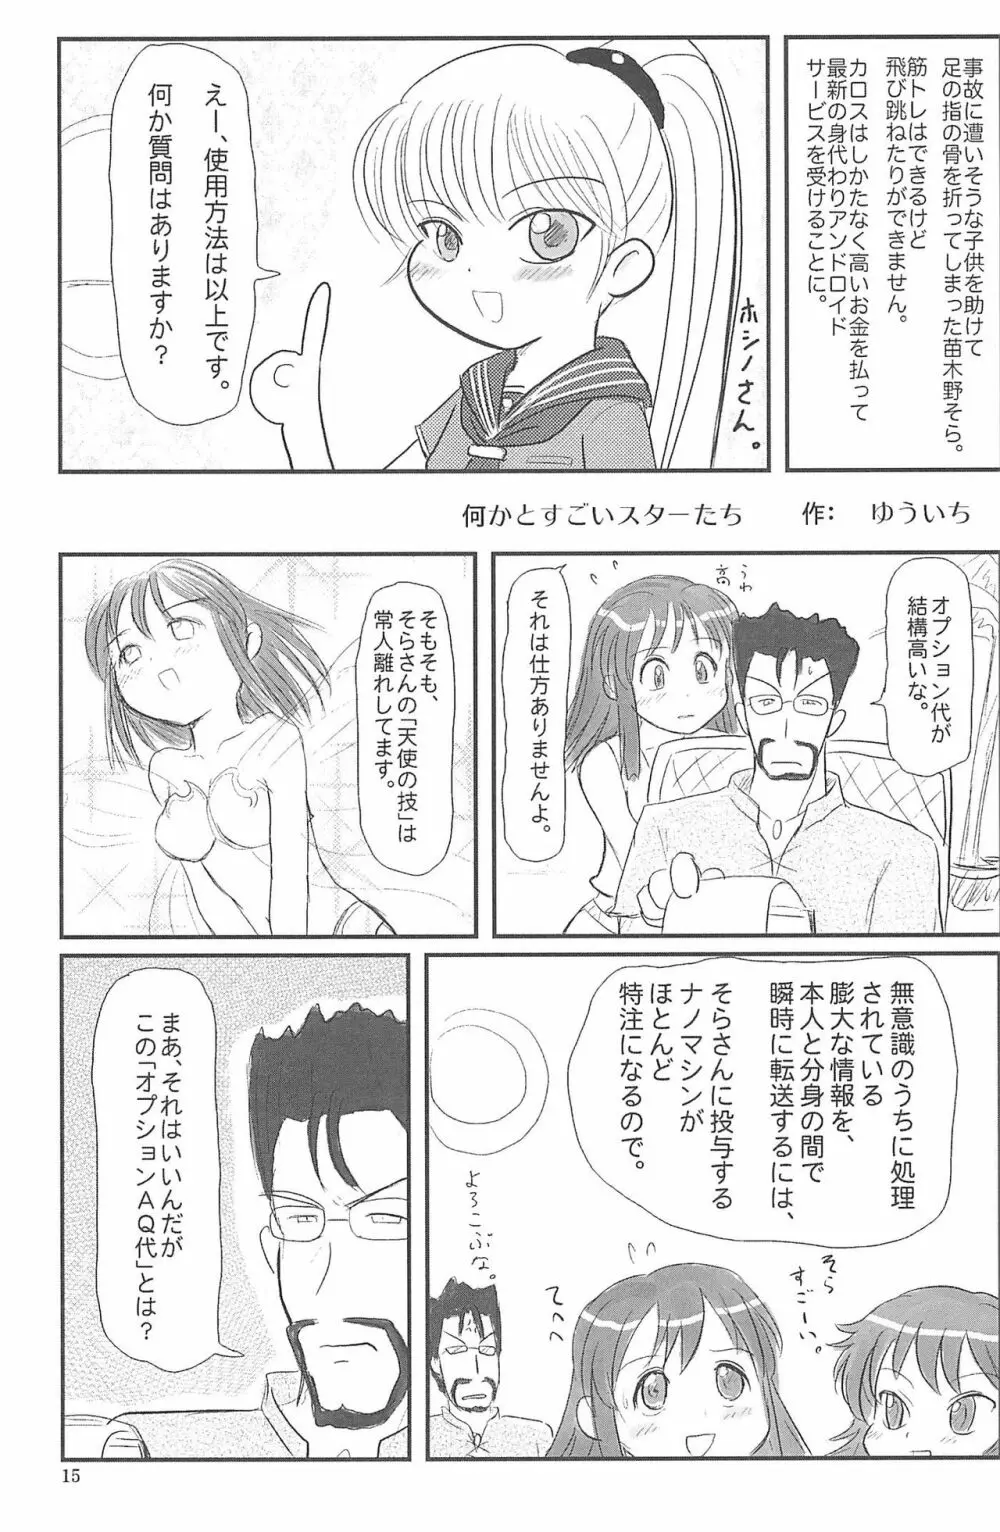 ND-special Volume 5 15ページ